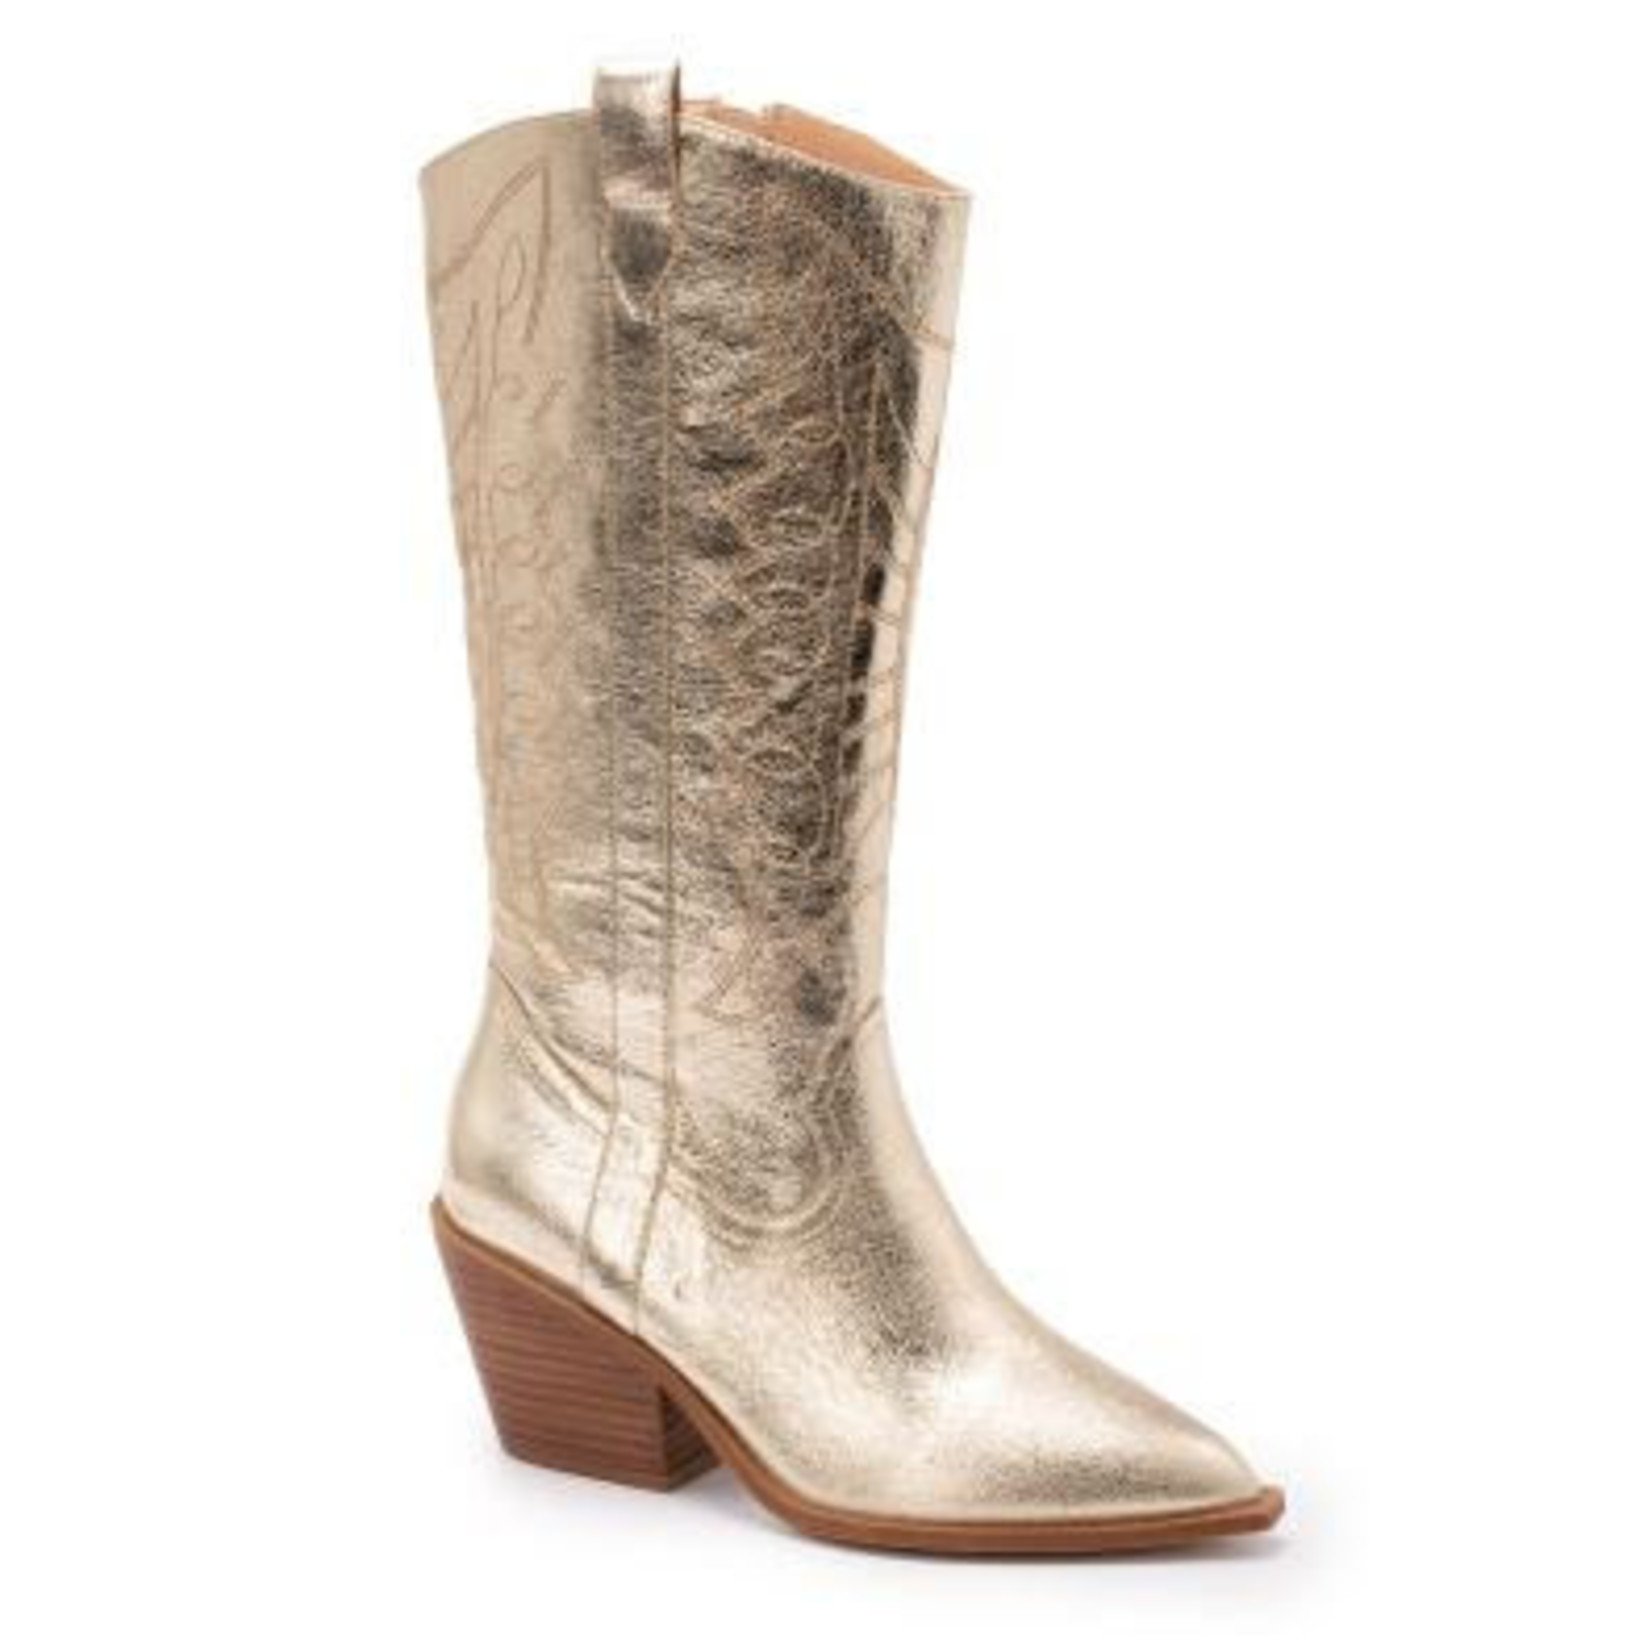 Corkys Howdy Boots - The Cherry Lane Boutique